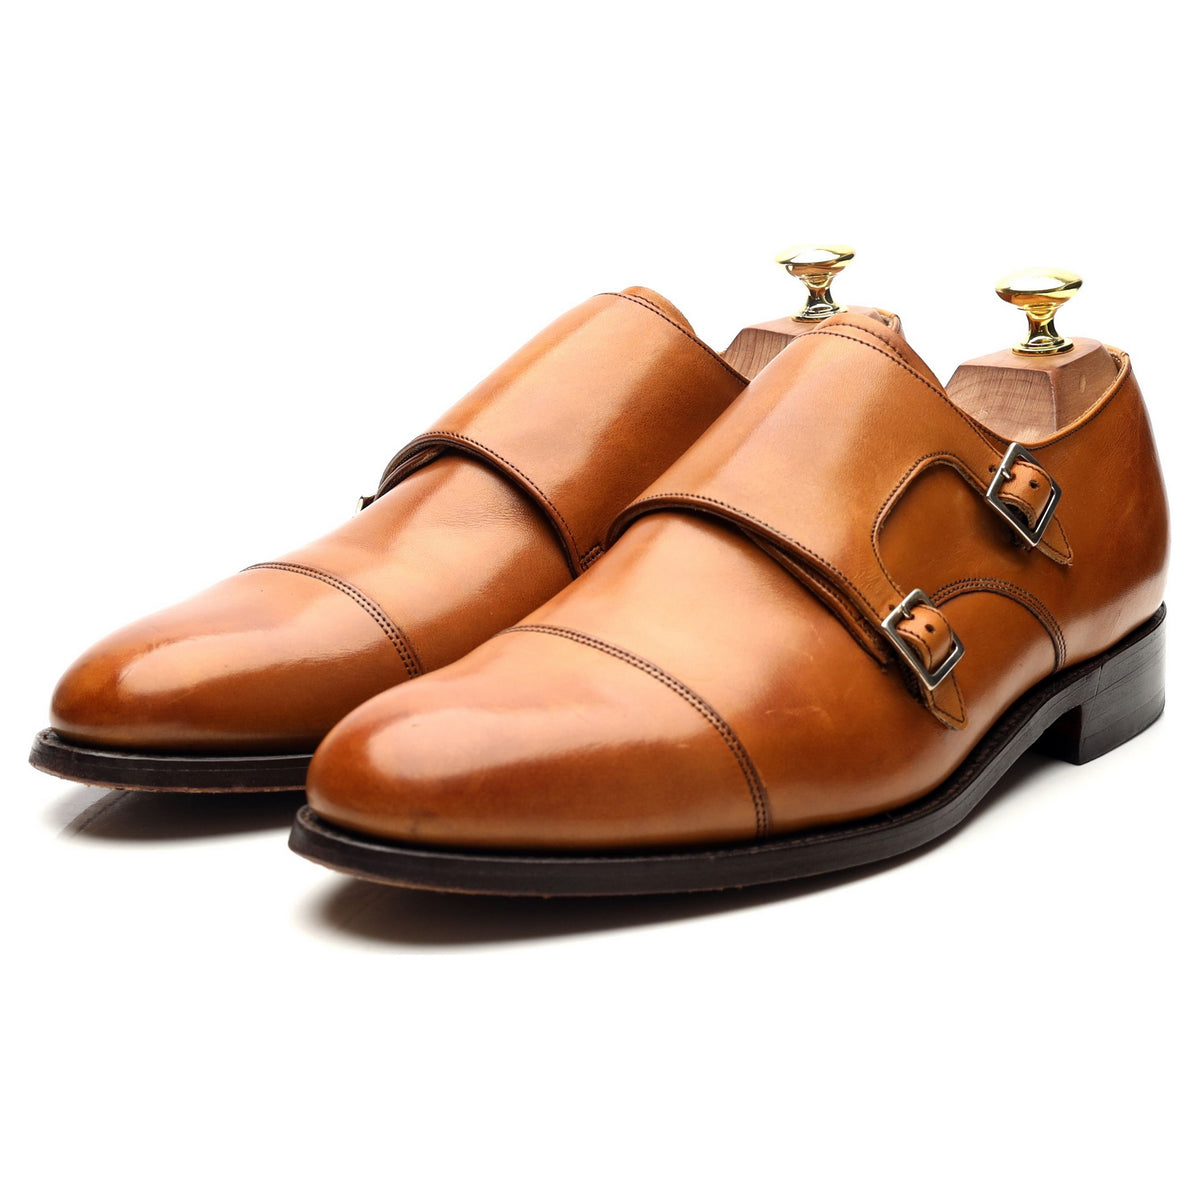 Tan Brown Leather Double Monk Strap UK 7.5 F